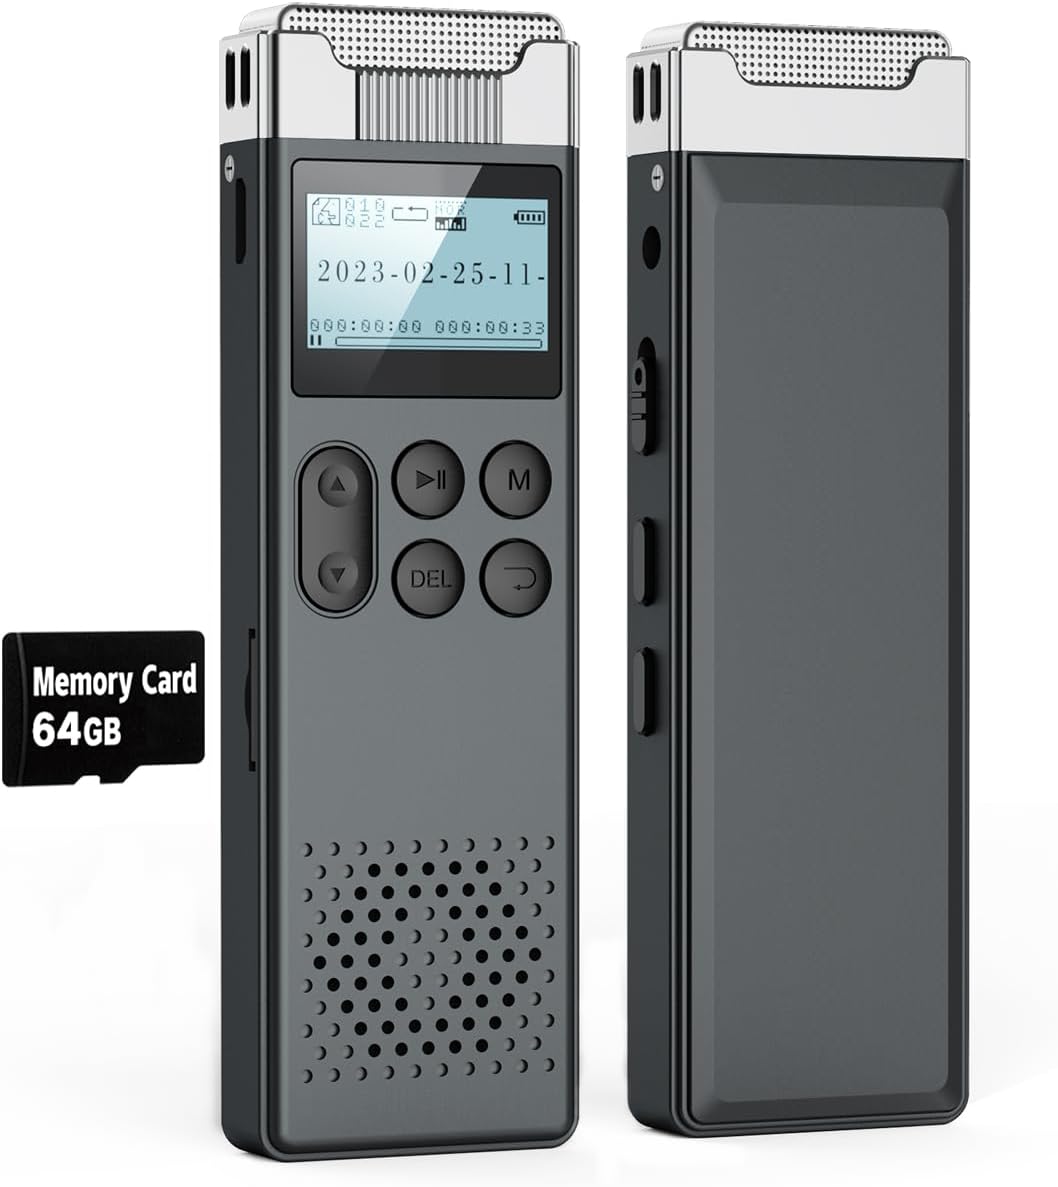 Review of 80GB Digital Voice Activated Recorder with Playback